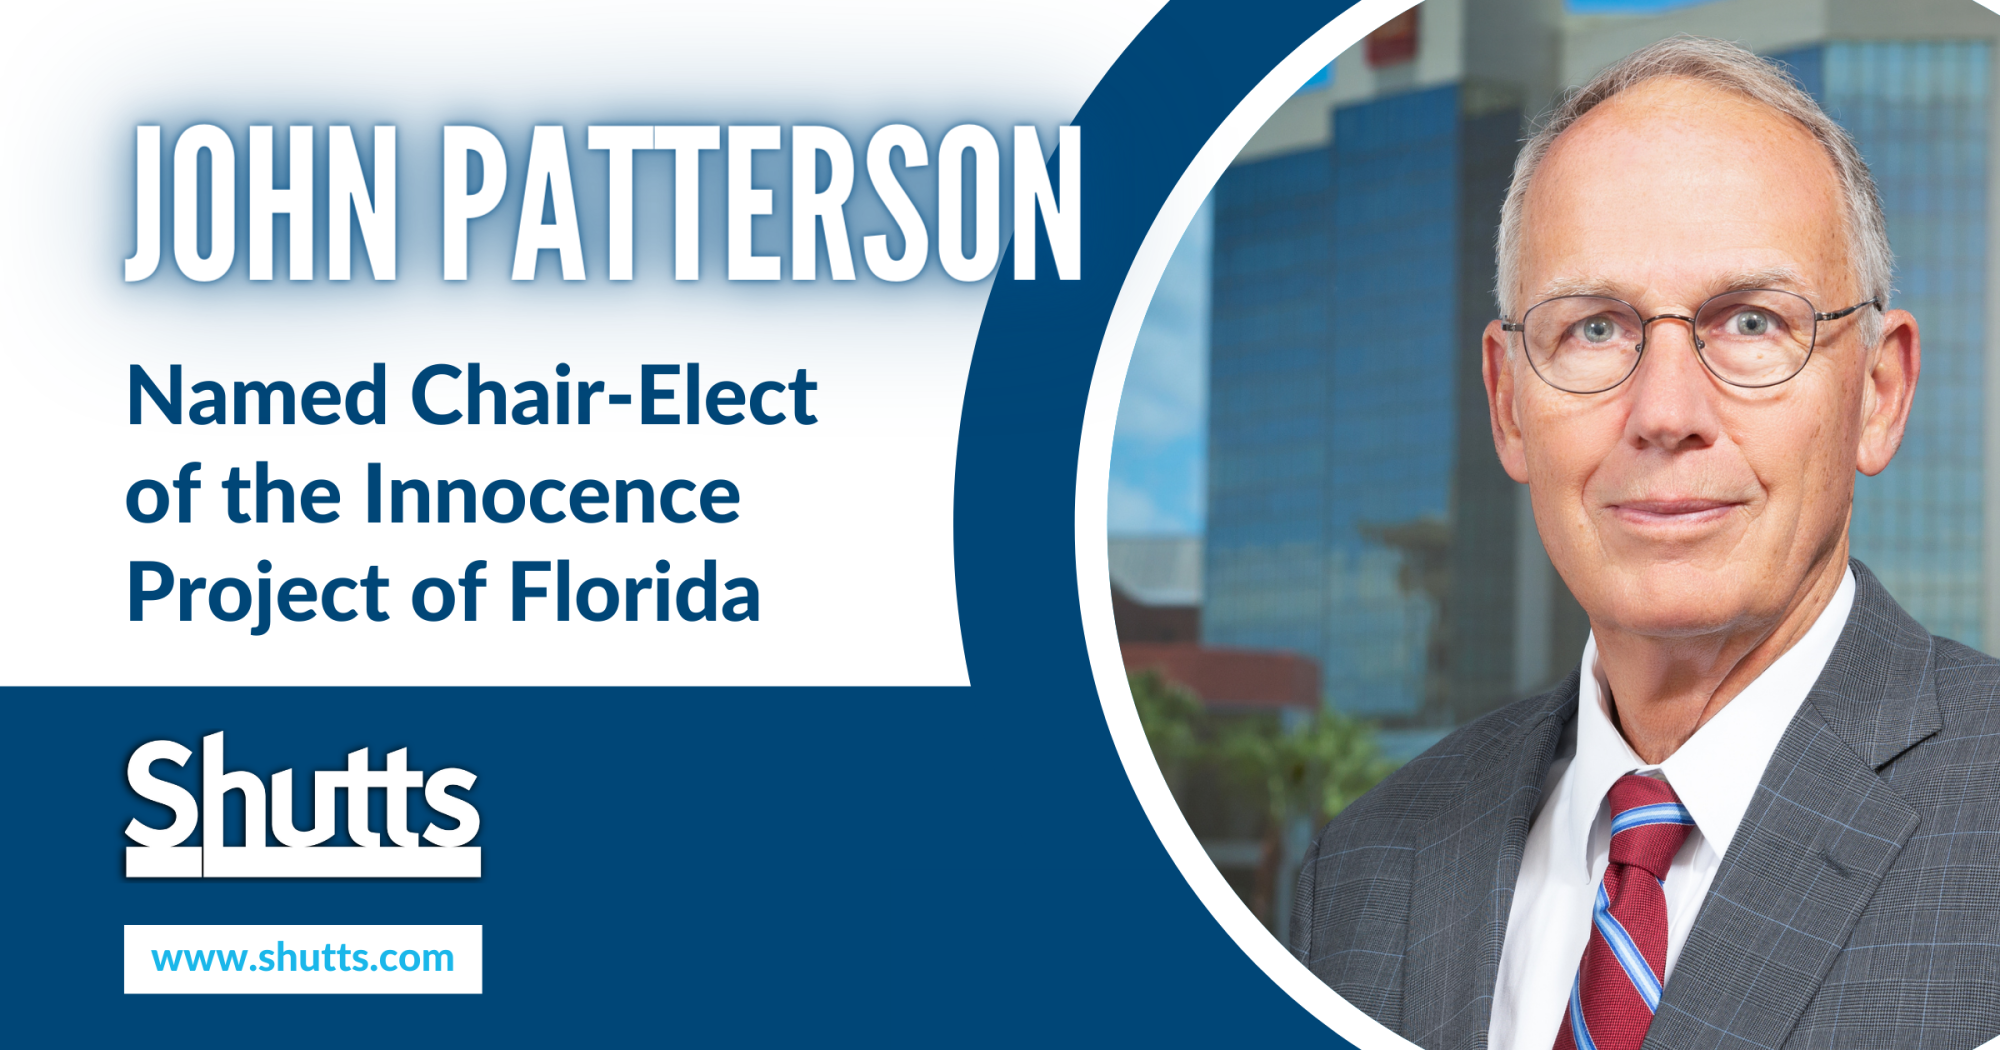 John Patterson Named Chair-Elect of the Innocence Project of Florida